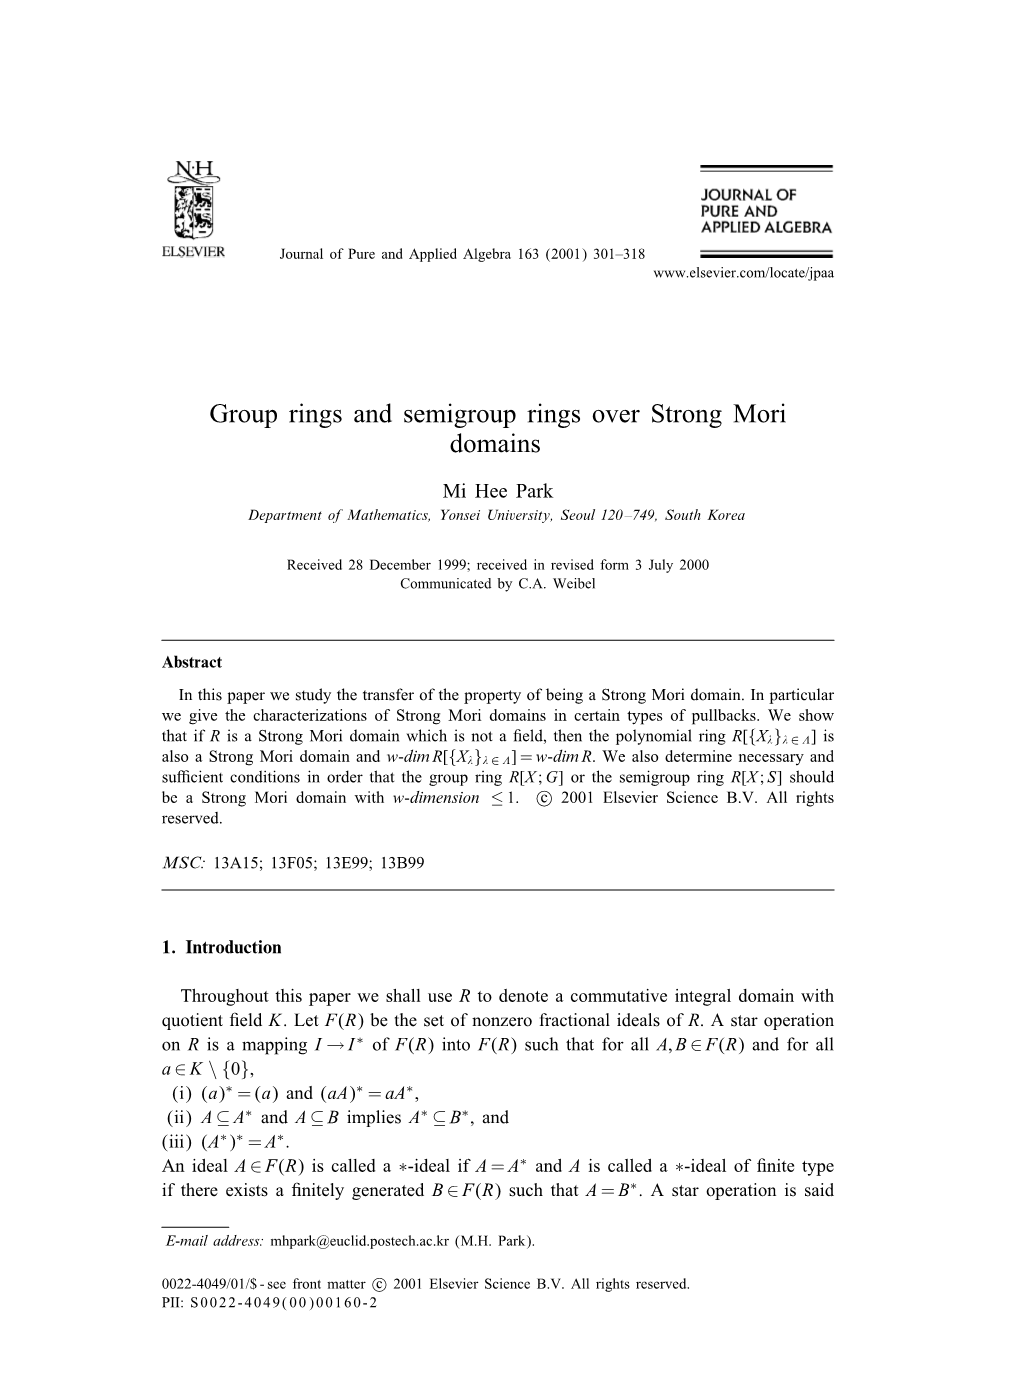 Group Rings and Semigroup Rings Over Strong Mori Domains